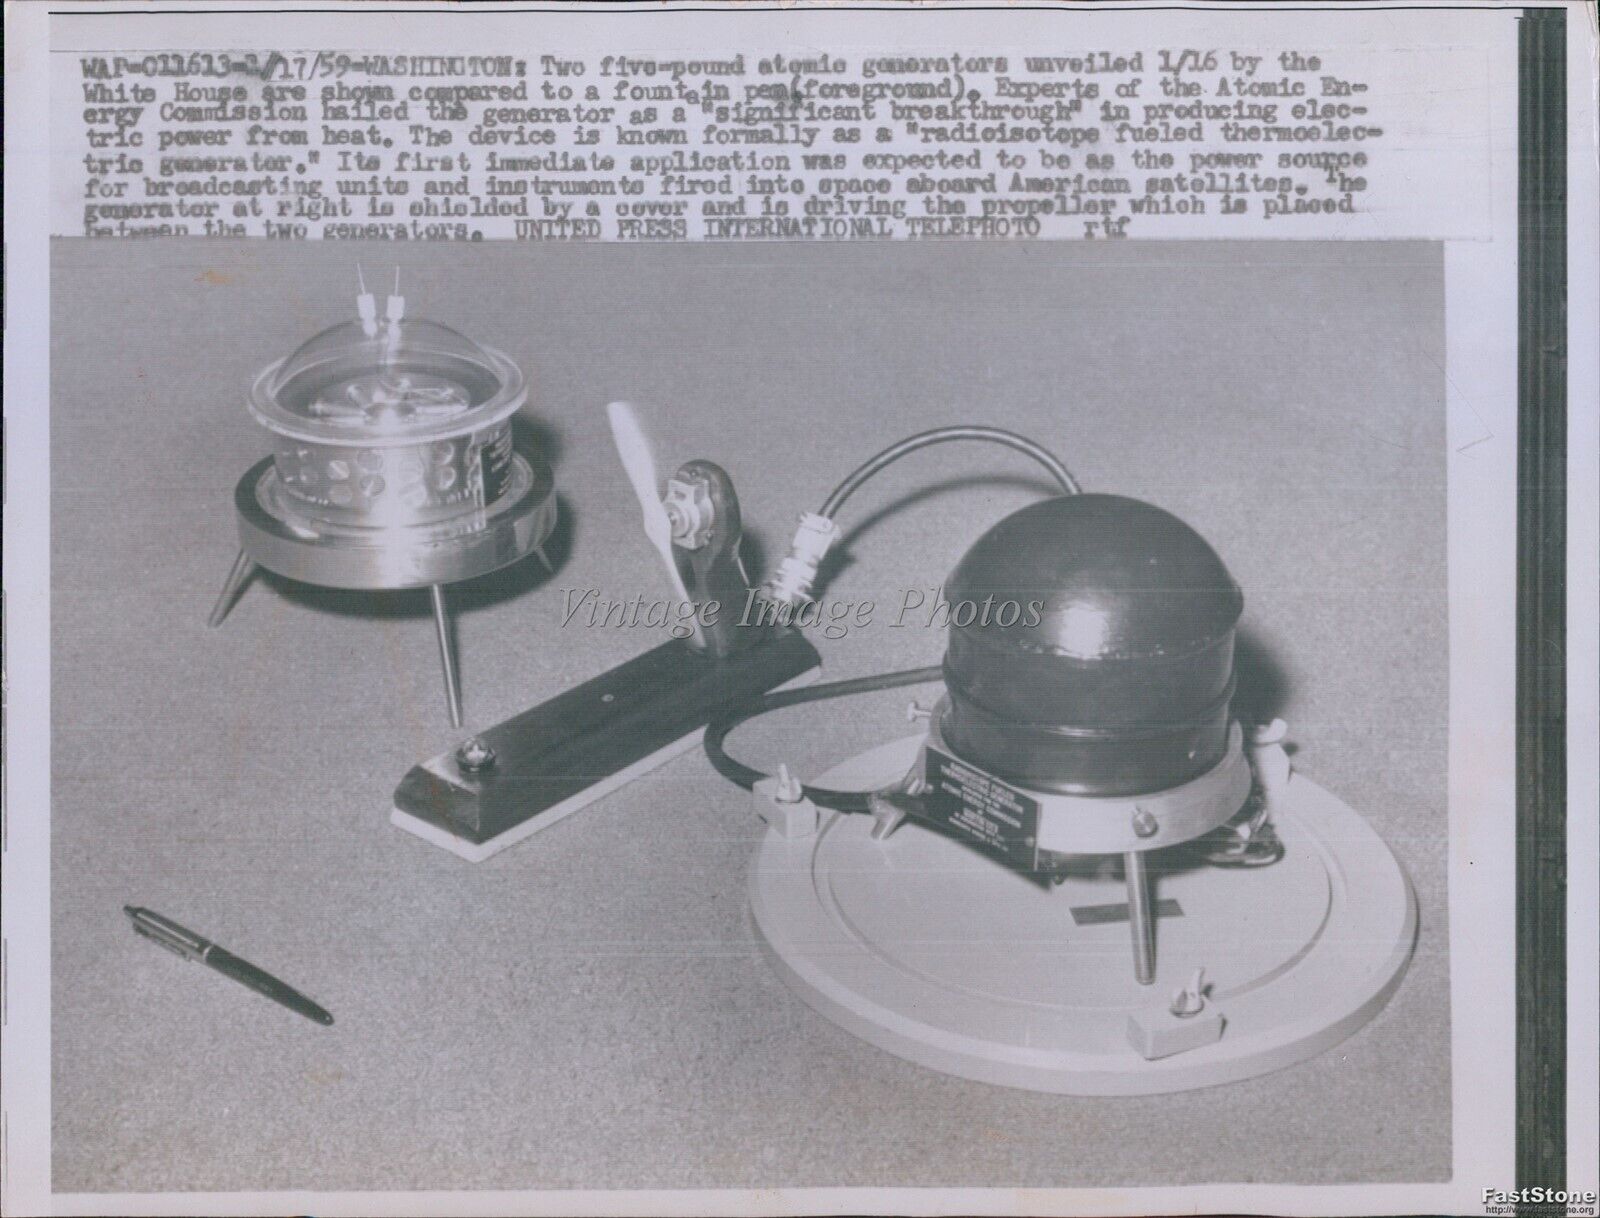 1959 A.E.C Radioisotope Fueled Thermoelectric Generator Science Wirephoto 7X9